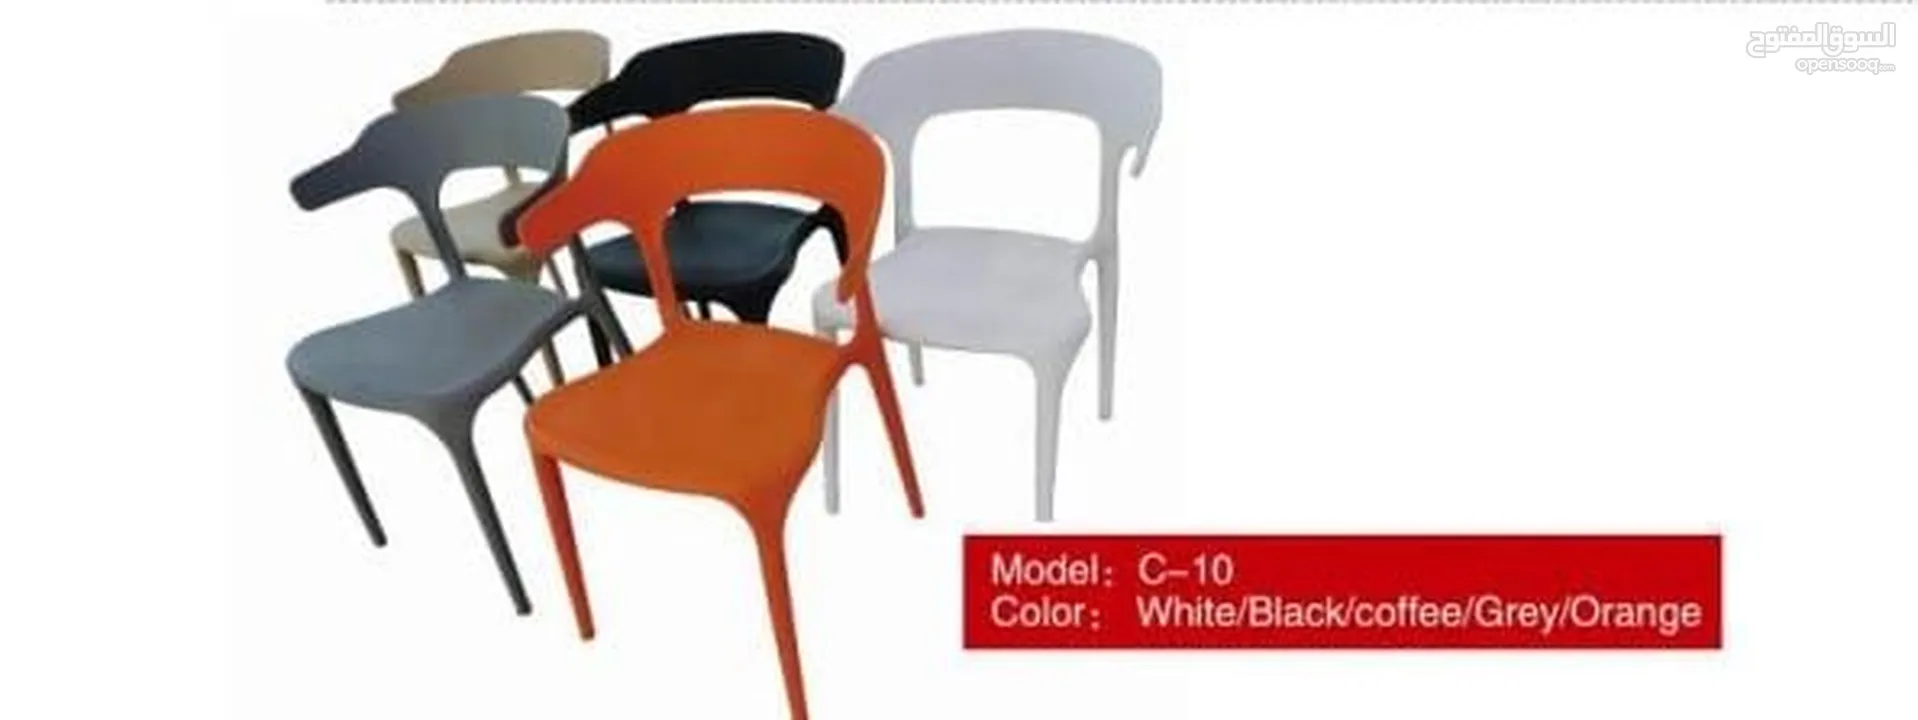 Brand New office chair different design